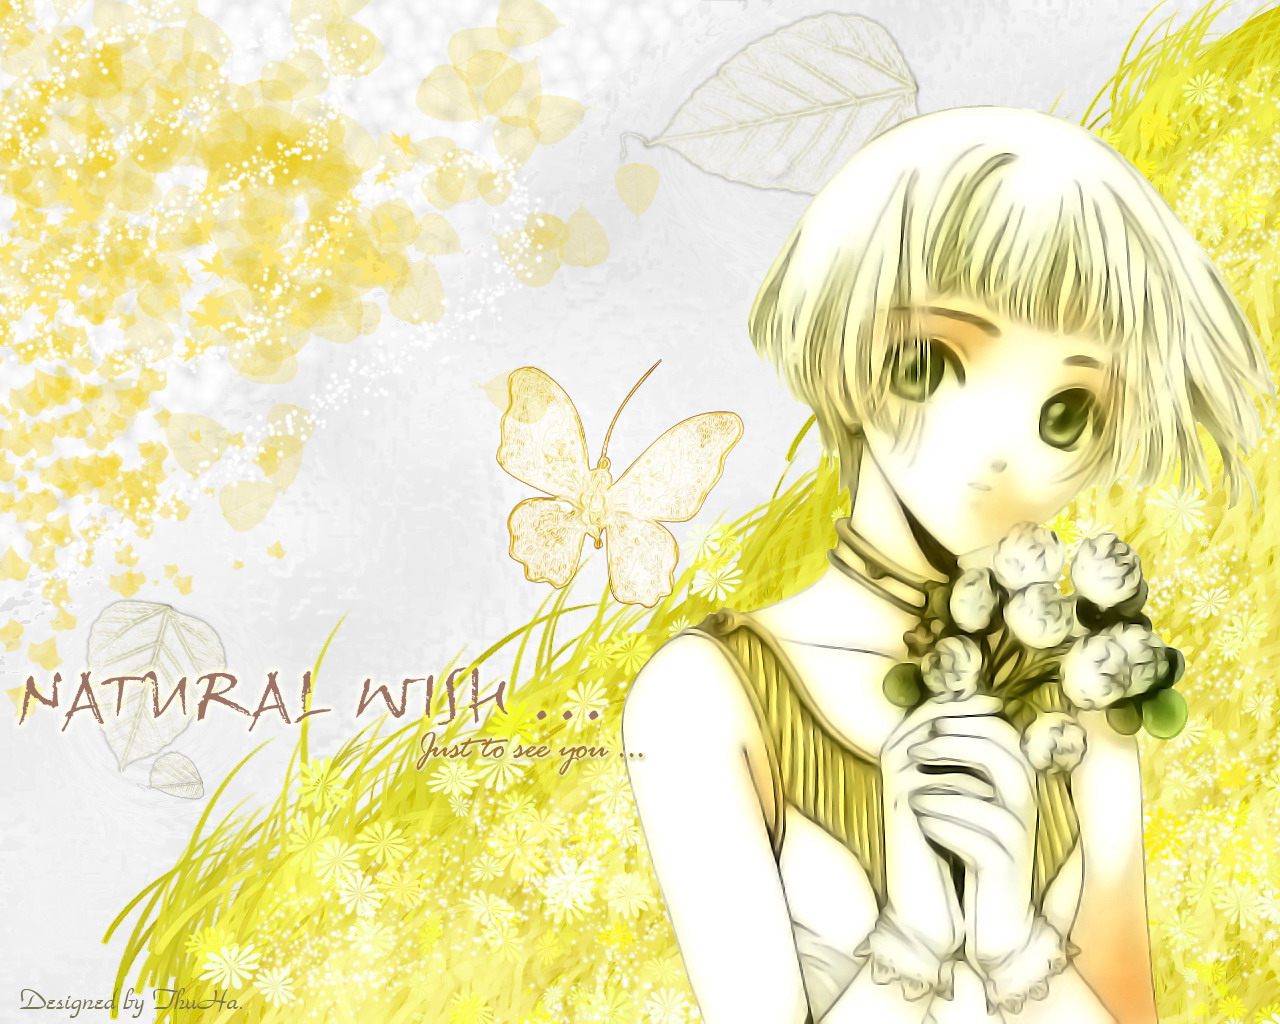 Are Ing Clamp Clover Manga HD Wallpaper Color Palette Tags